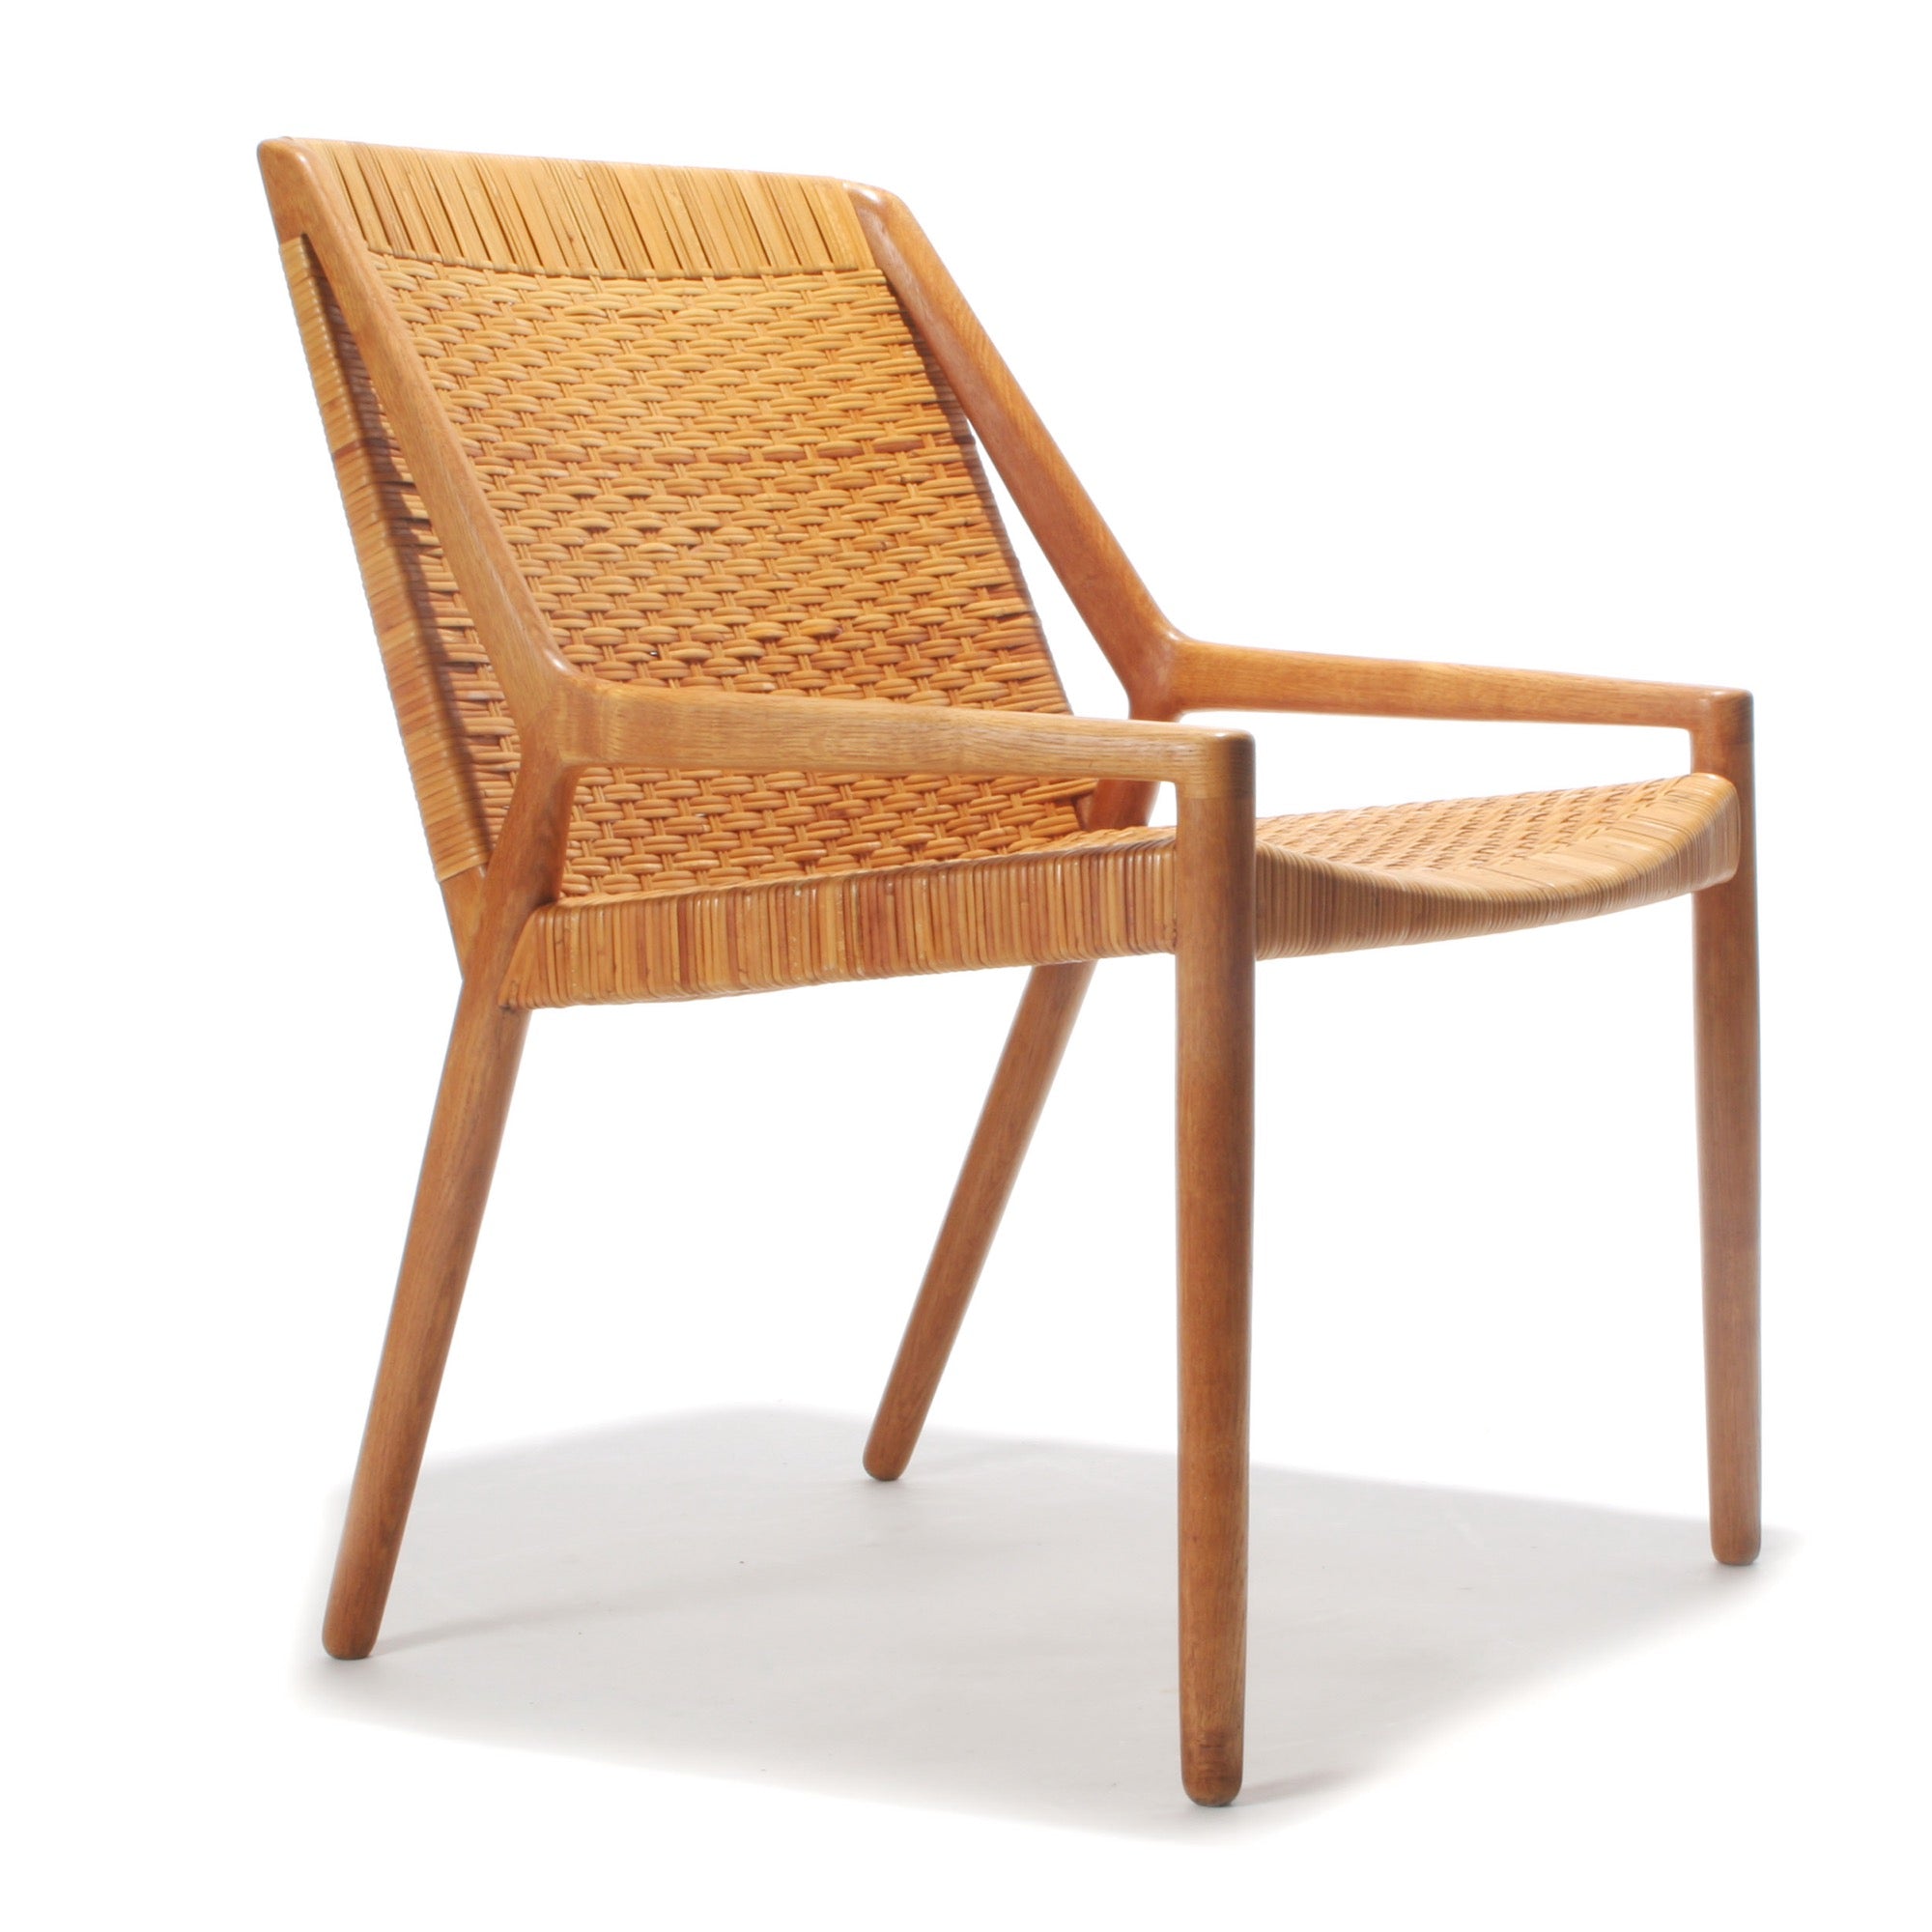 Oak and Cane Lounge Chair by Ejner Larsen & Aksel Bender Madsen for Willy Beck